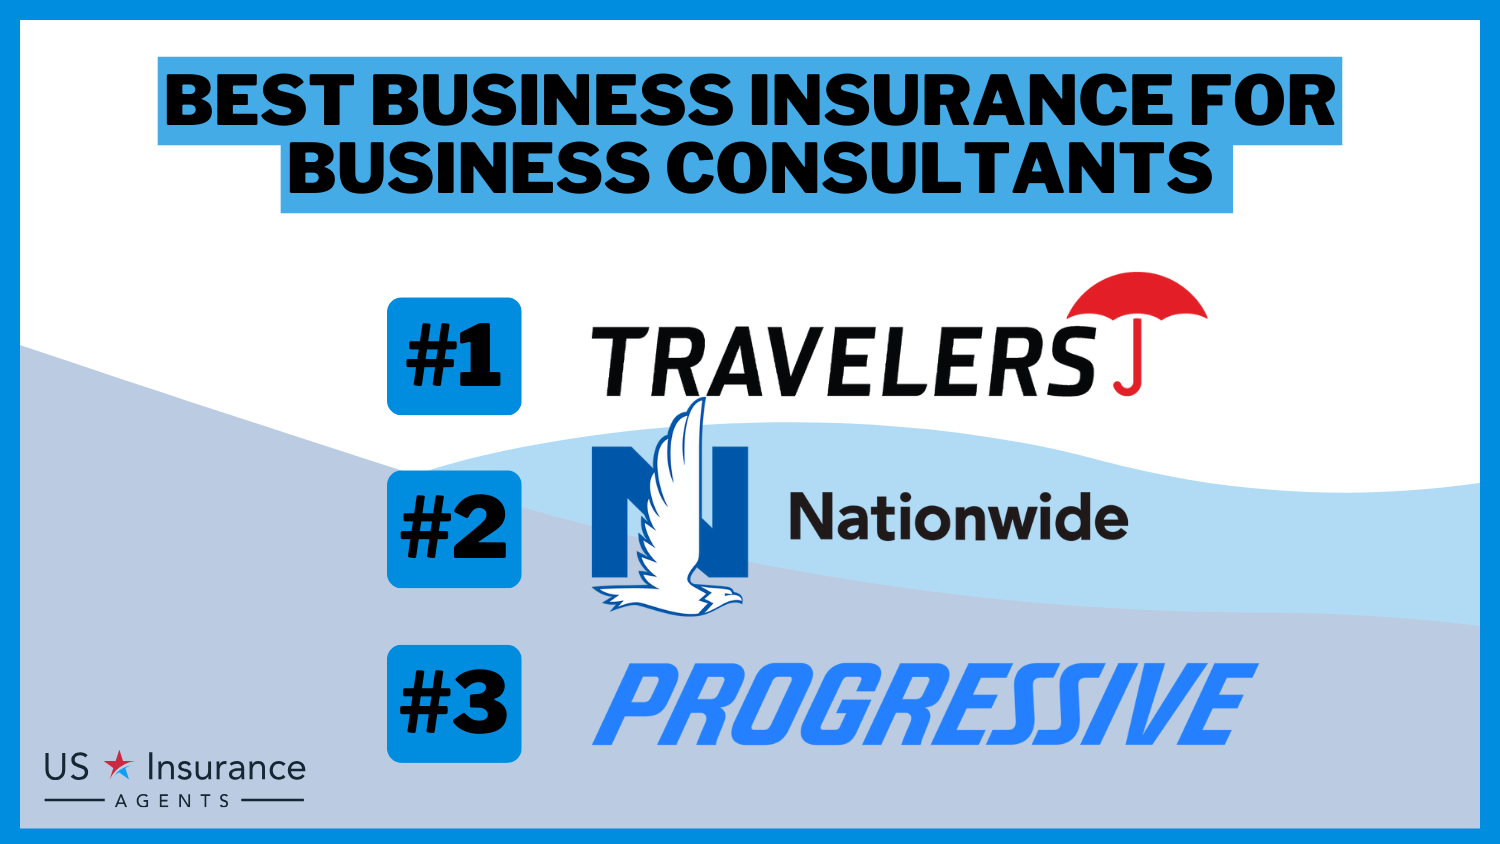 Best Business Insurance for Business Consultants: Travelers, Nationwide, Progressive